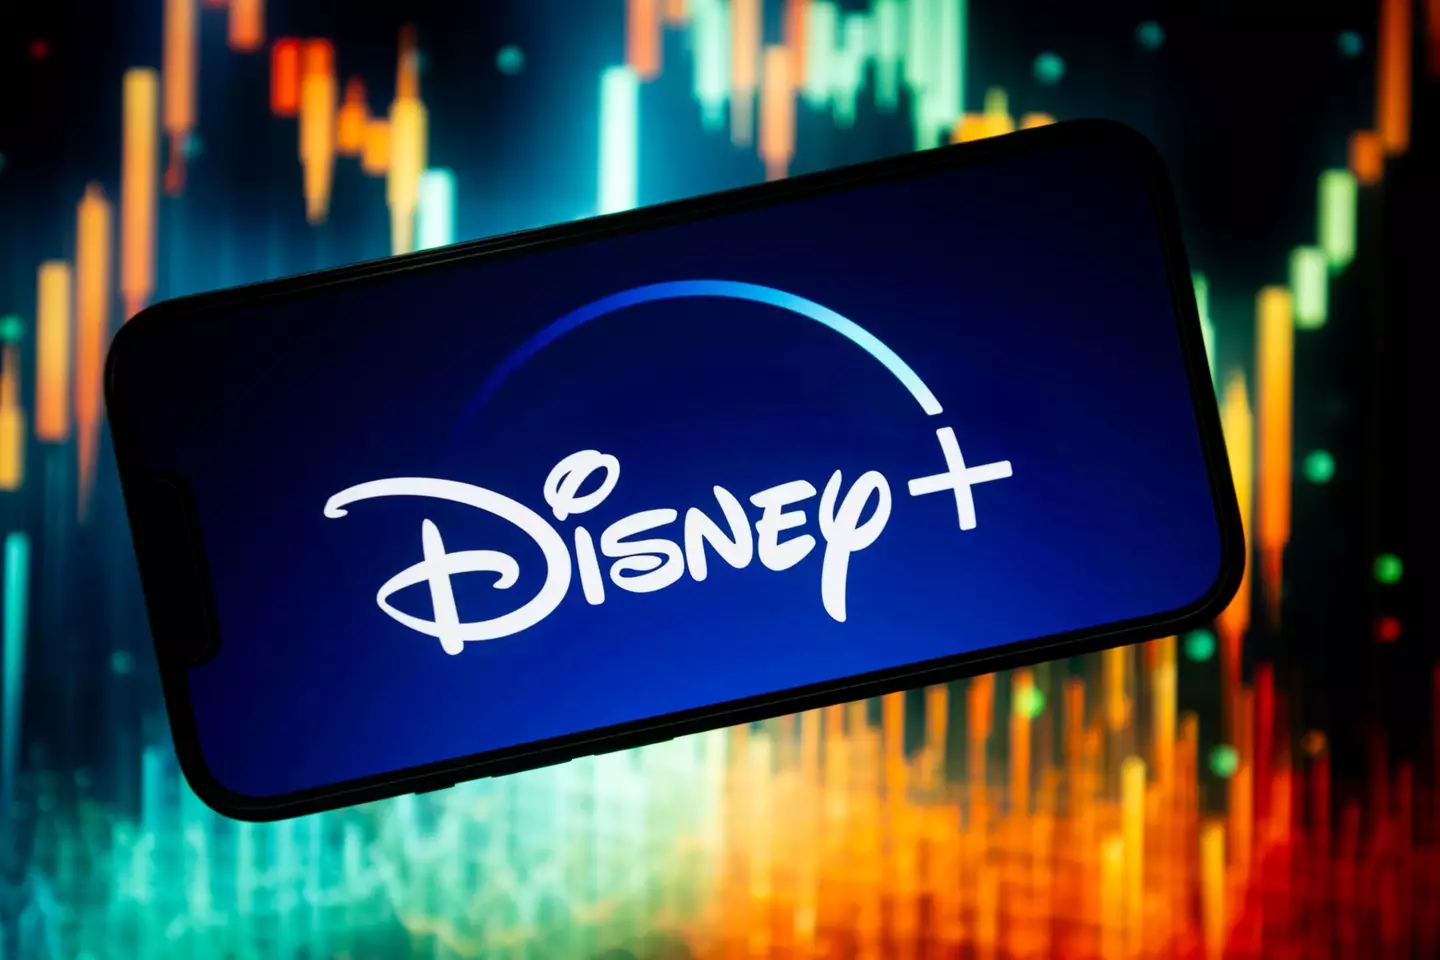 Disney+ is one of the top watched streaming platforms in the country.